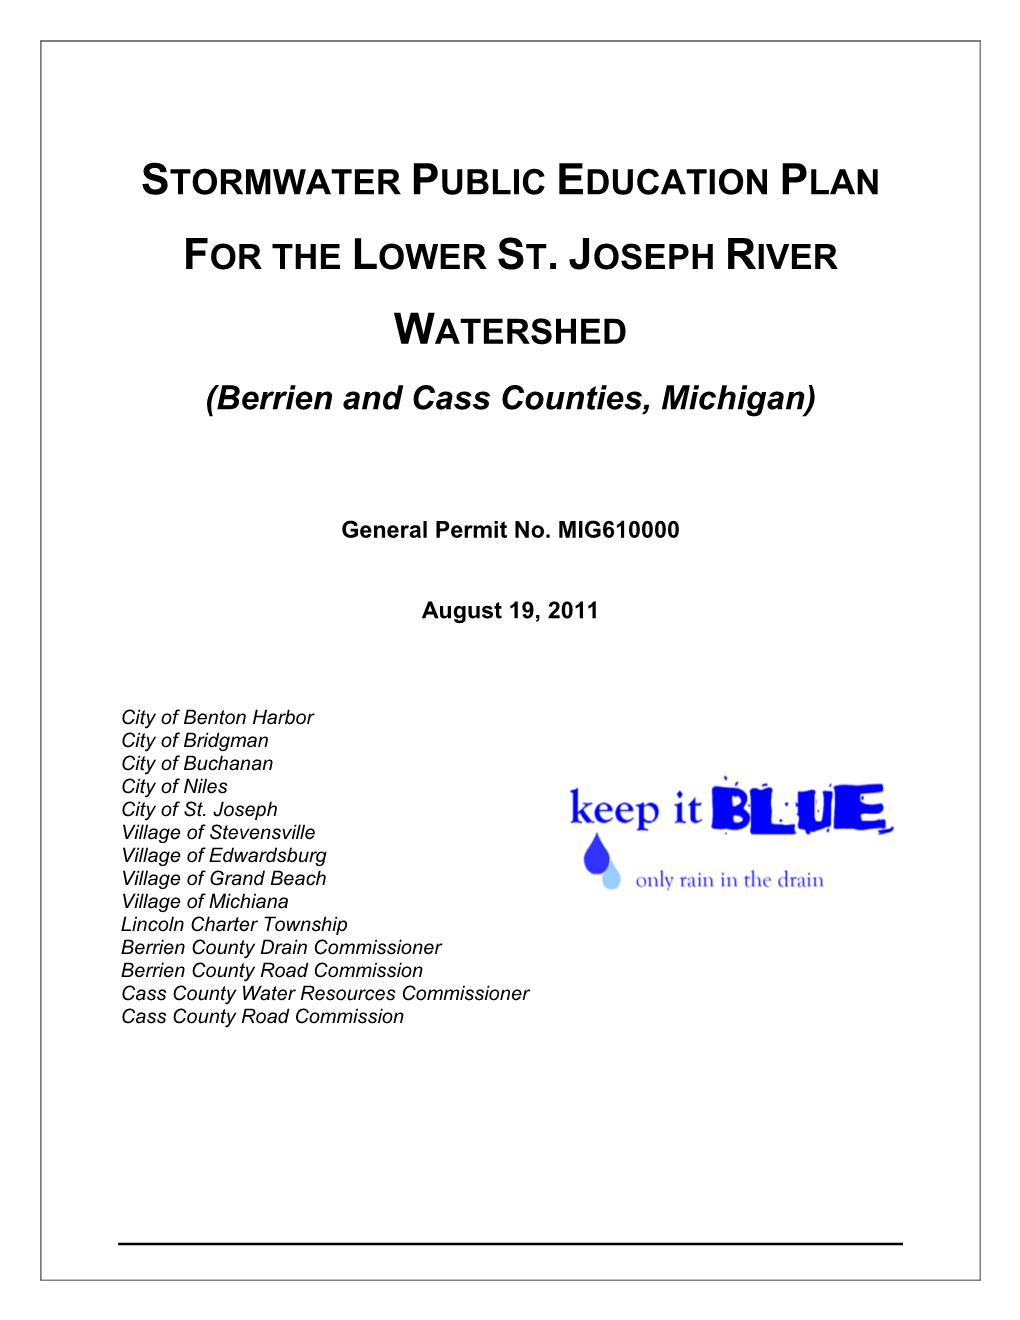 Stormwater Public Education Plan for the Lower St